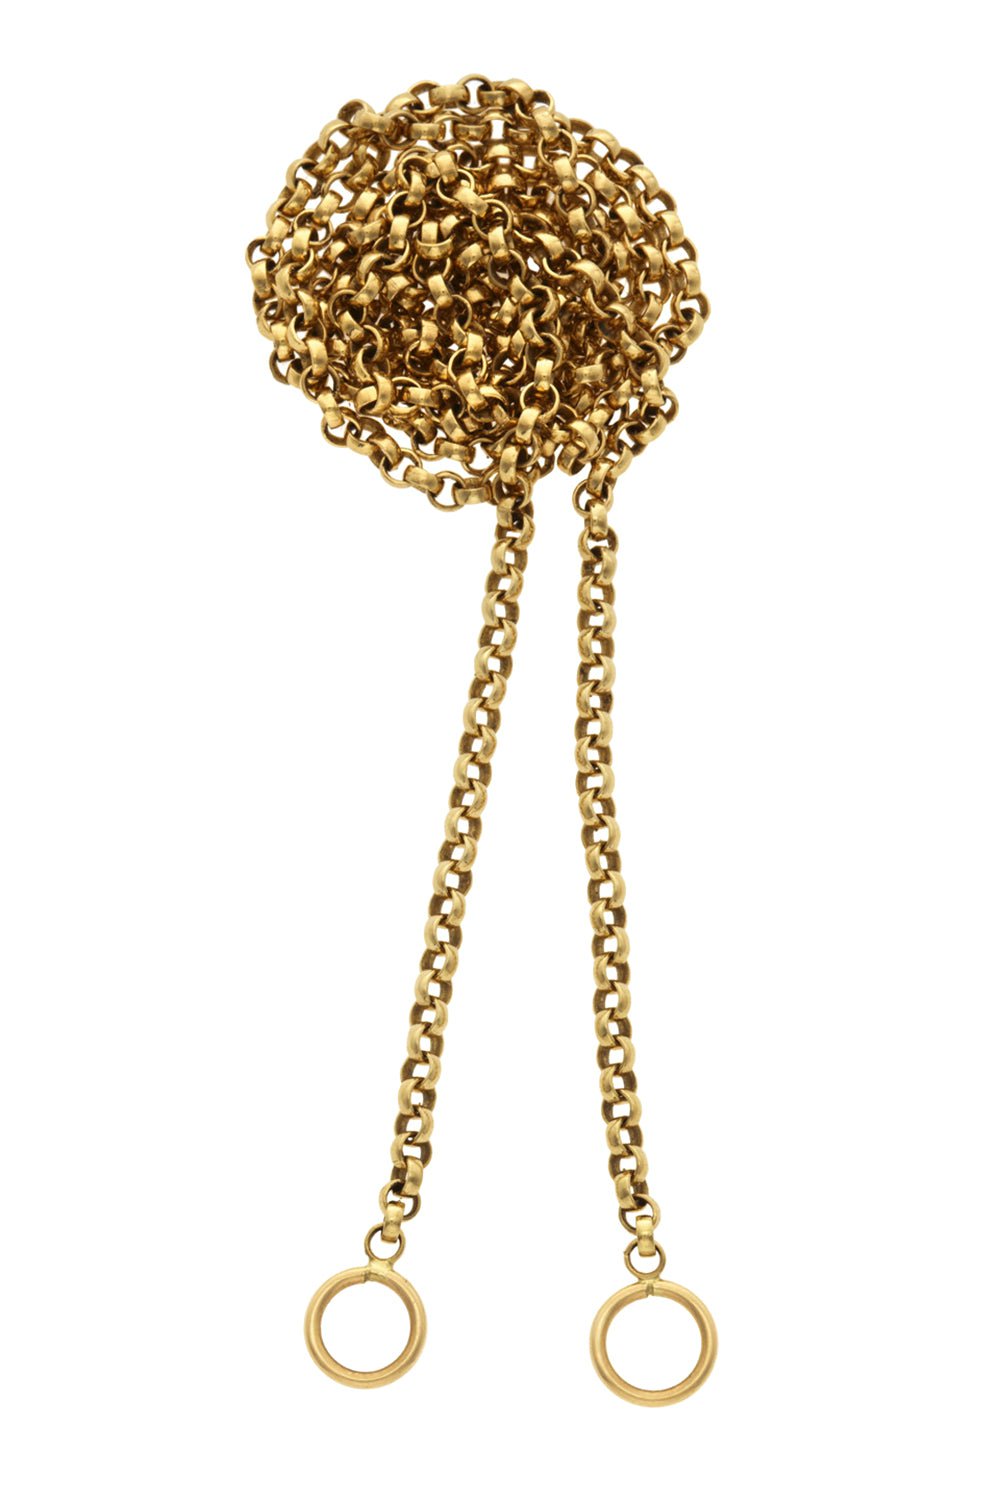 MARLA AARON-Rolo Chain - 18in-YELLOW GOLD